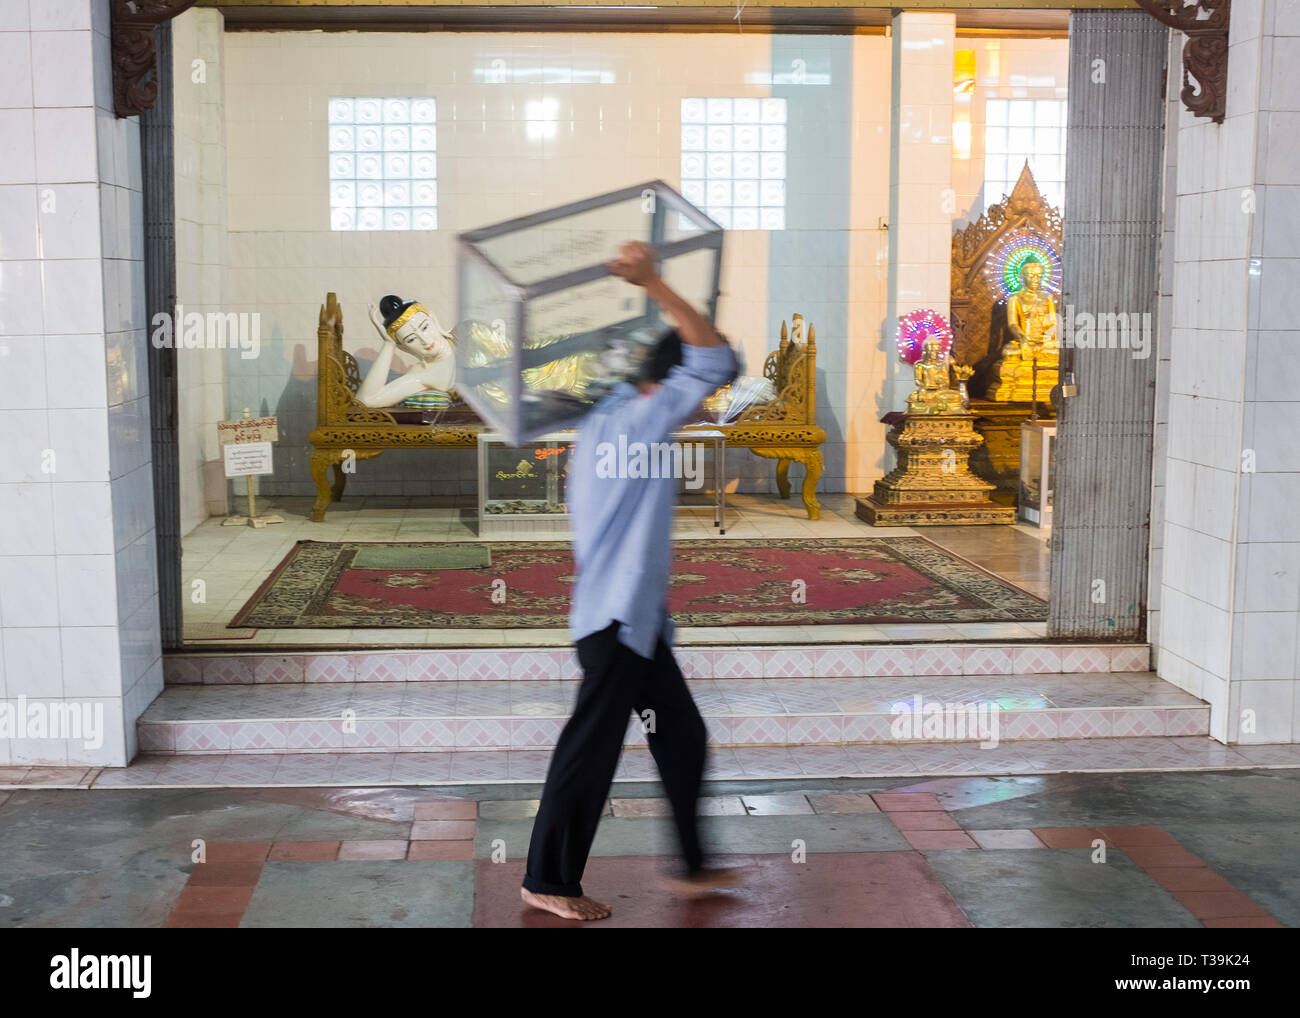 man placing the donation boxes early in the morning inside the Chauk Htat Gyi Pagoda Temple of the 65 meter long Reclining Buddha image, Yangon,Myanma Stock Photo